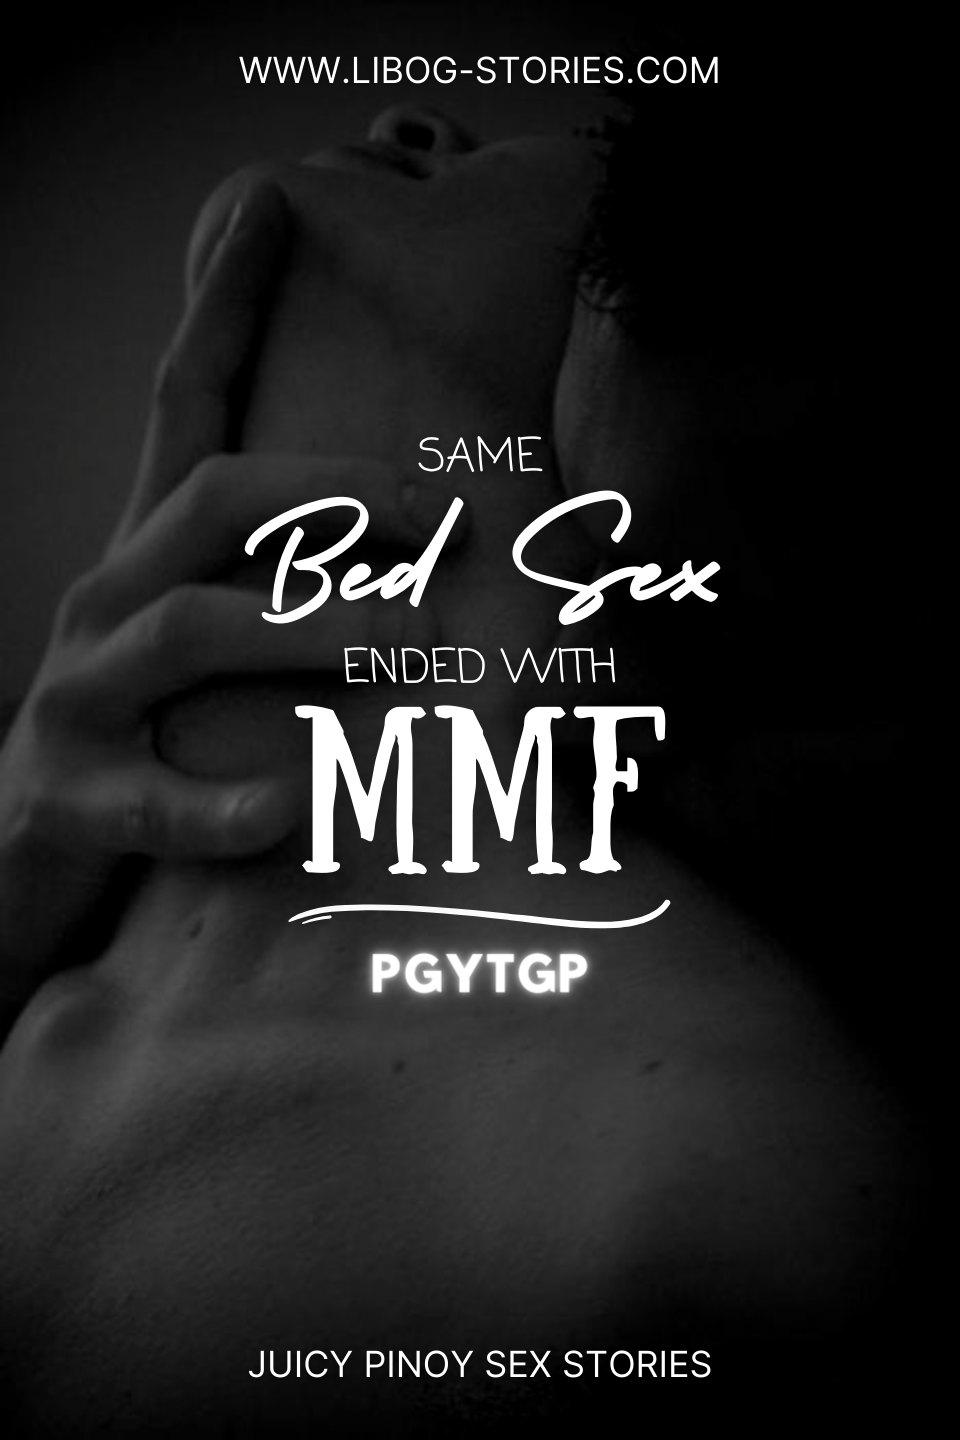 Same Bed Sex Eneded With Mmf